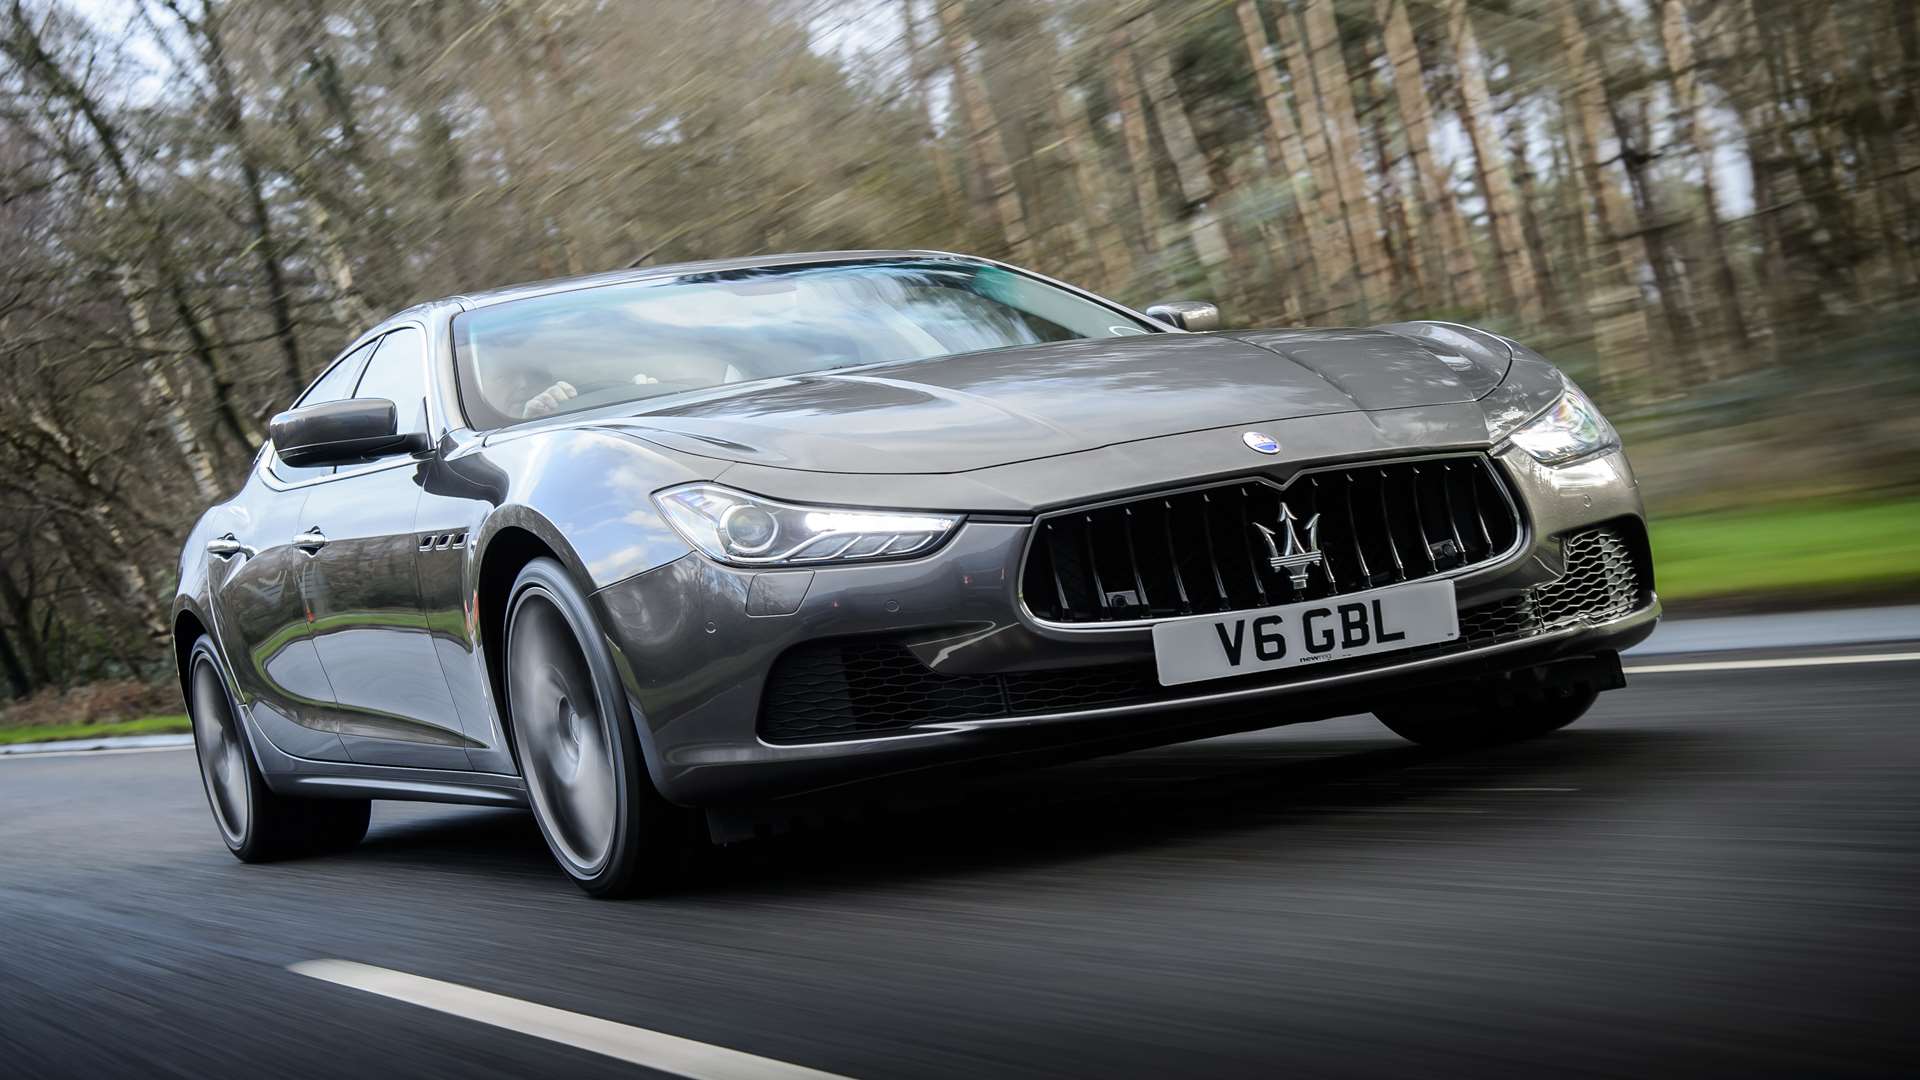 The Ghibli is Maserati's most affordable model